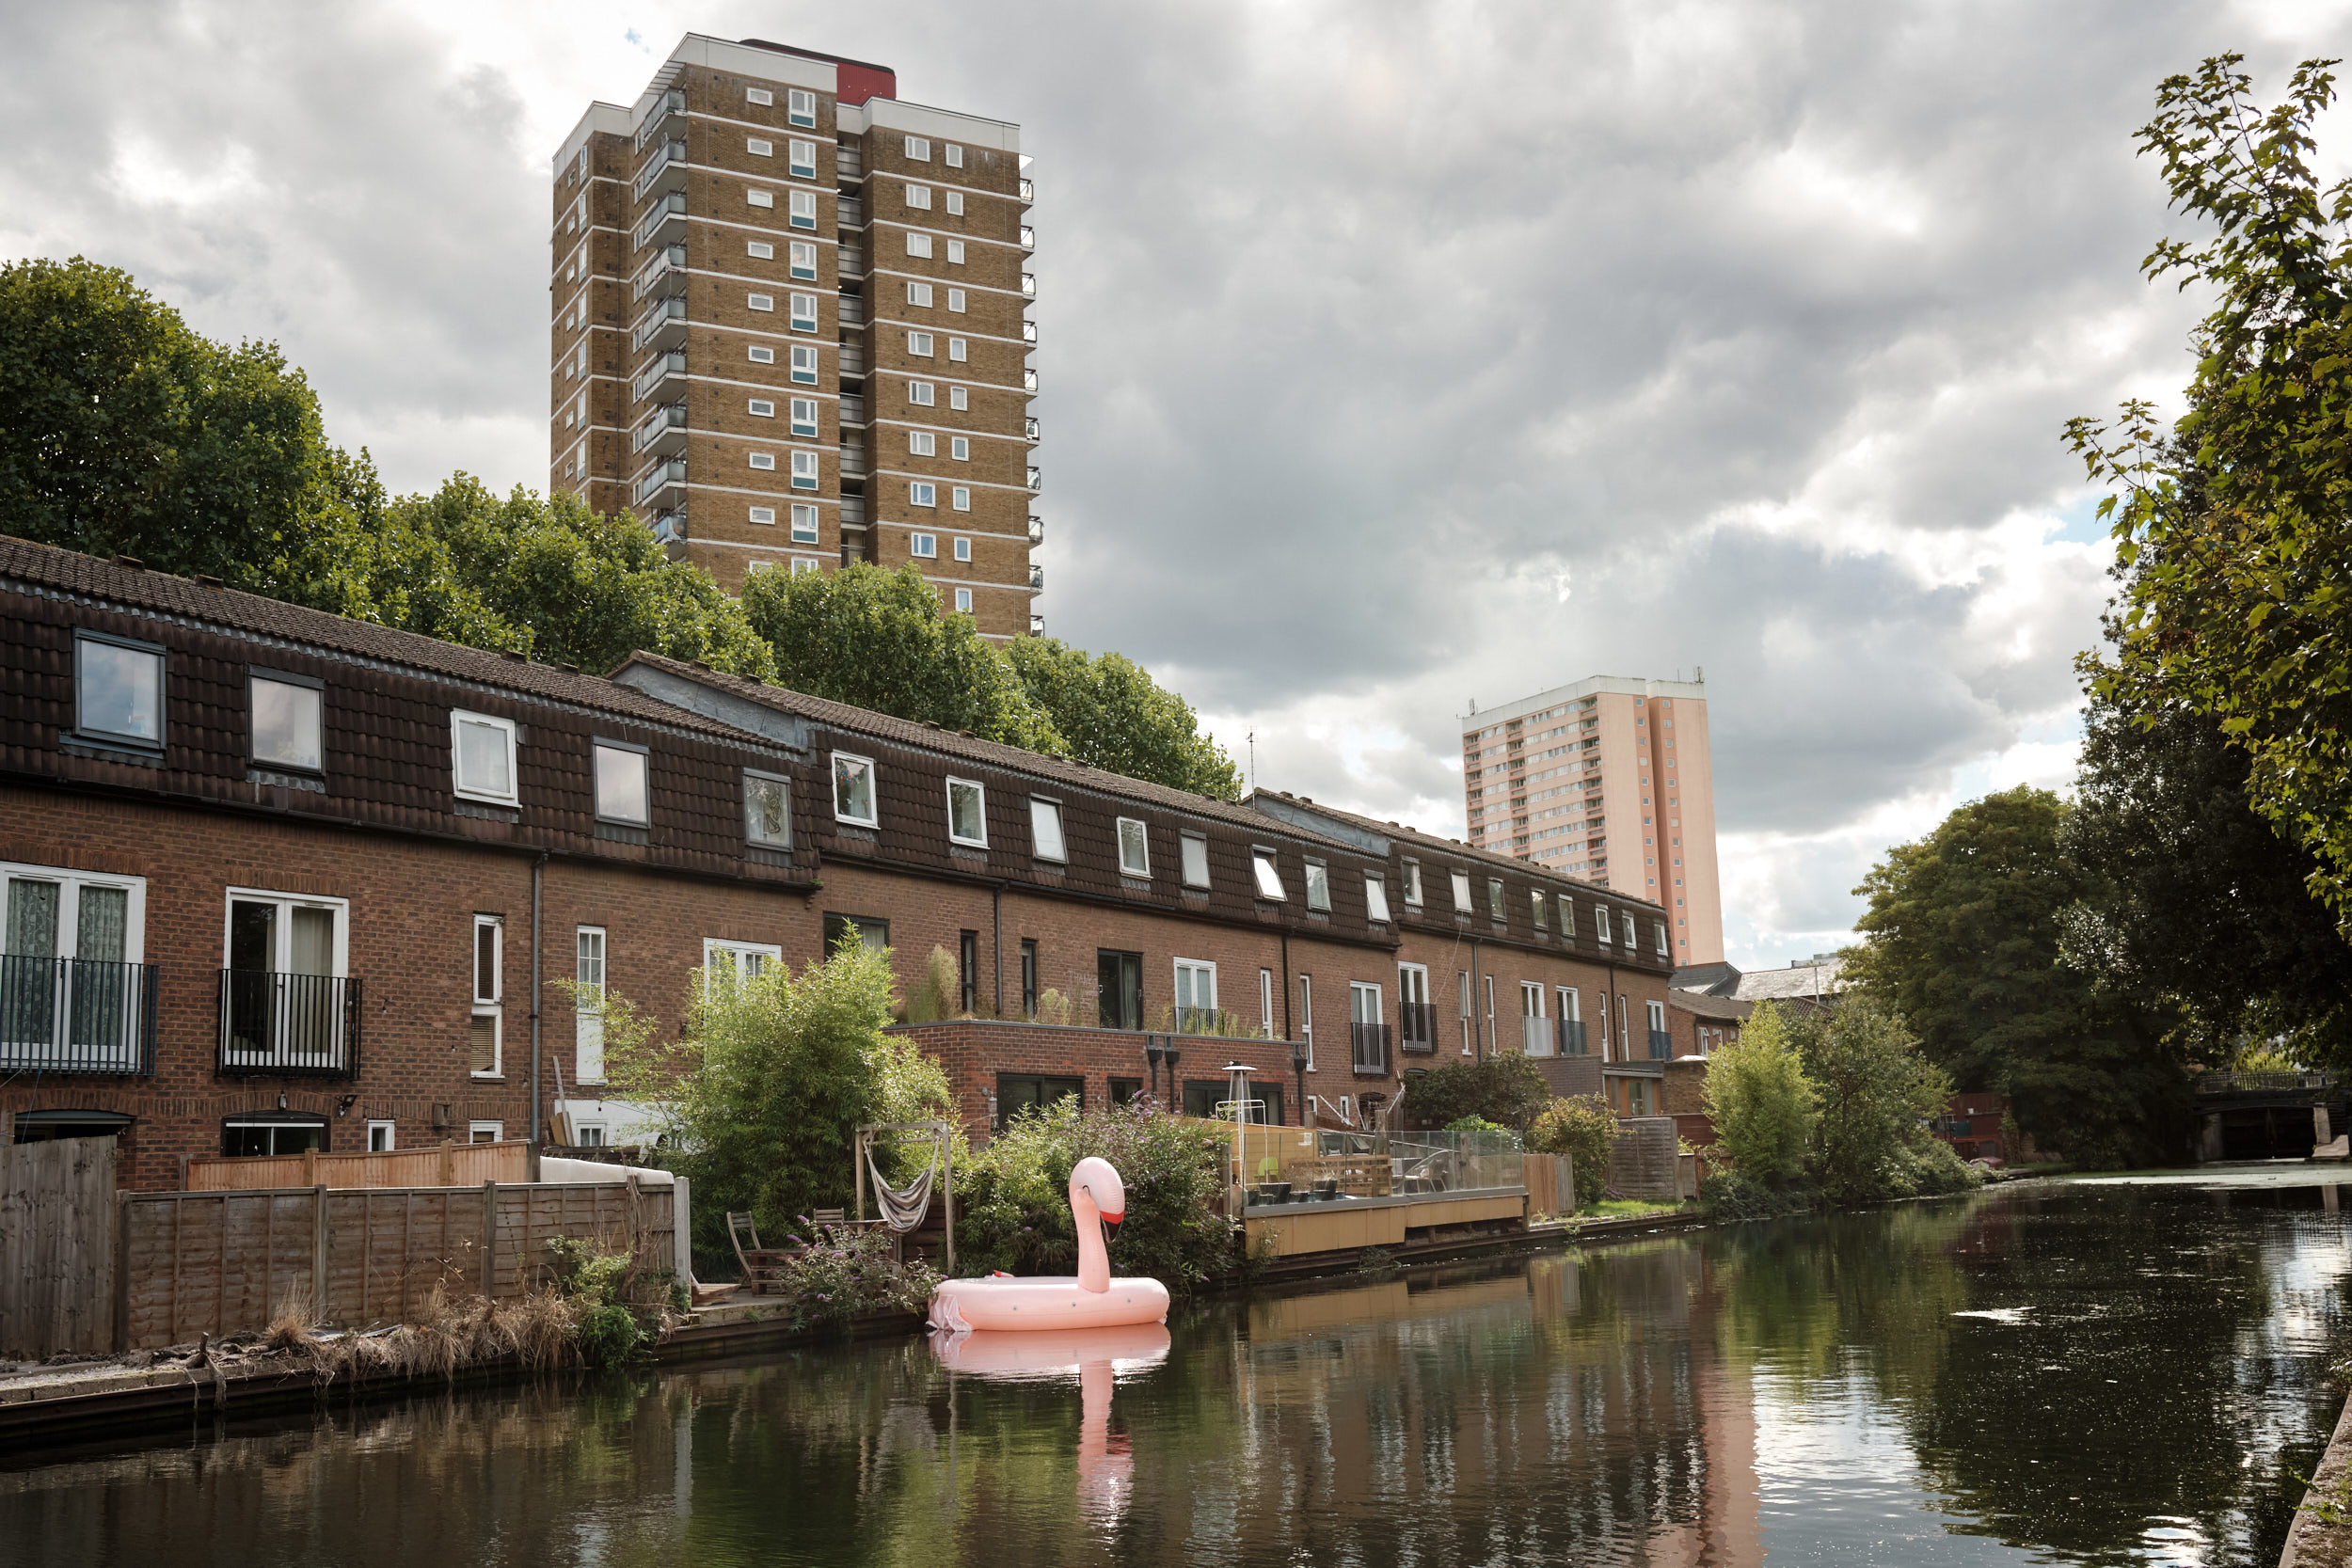 A FLAMINGO FLOATS ON THE REGENTS CANAL IN LONDON ENGLAND